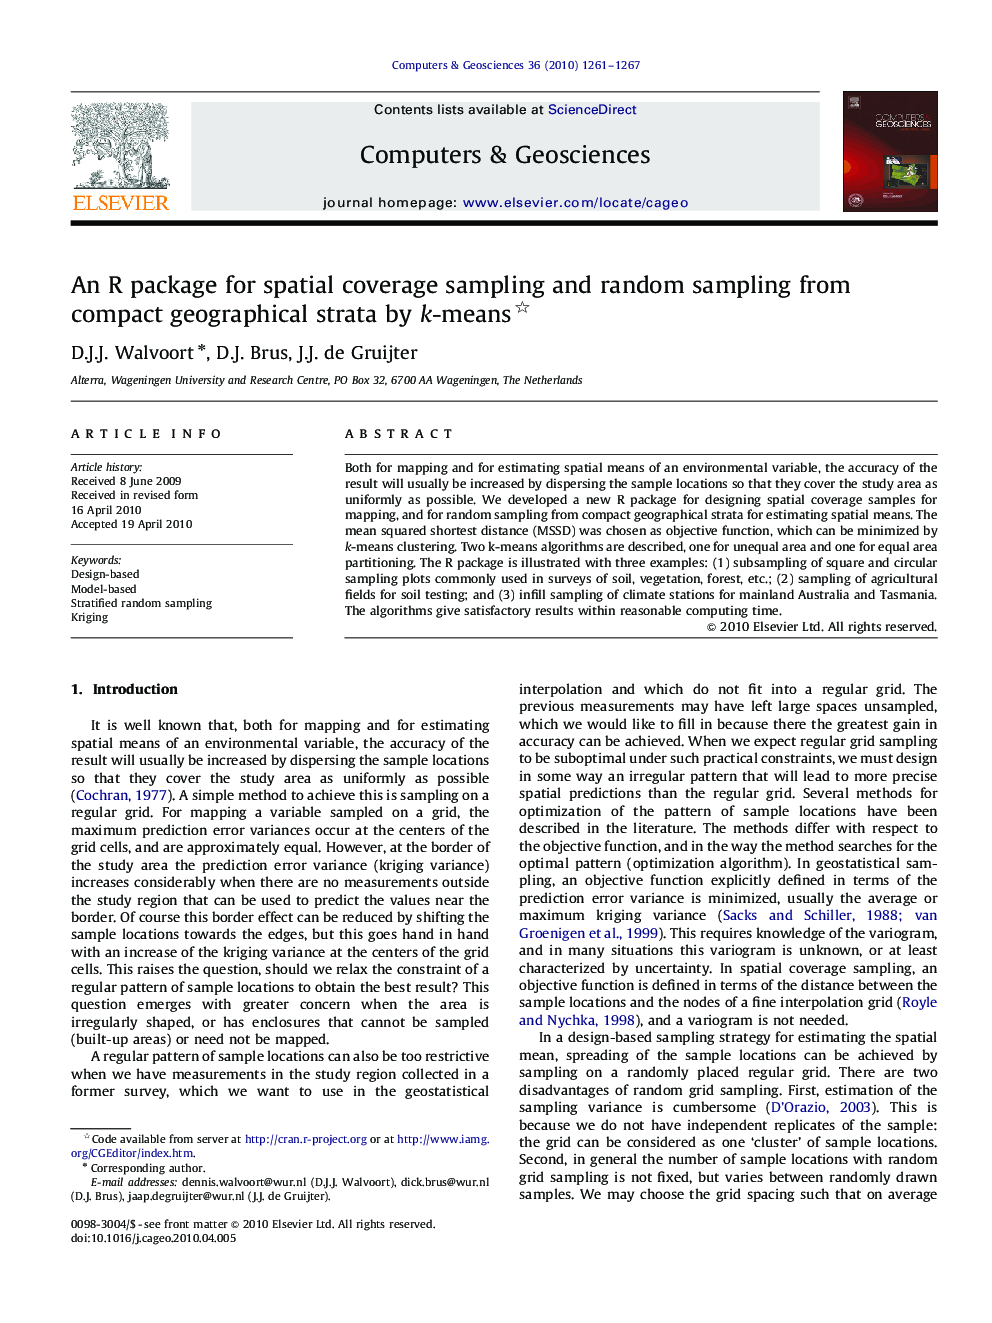 An R package for spatial coverage sampling and random sampling from compact geographical strata by k-means 